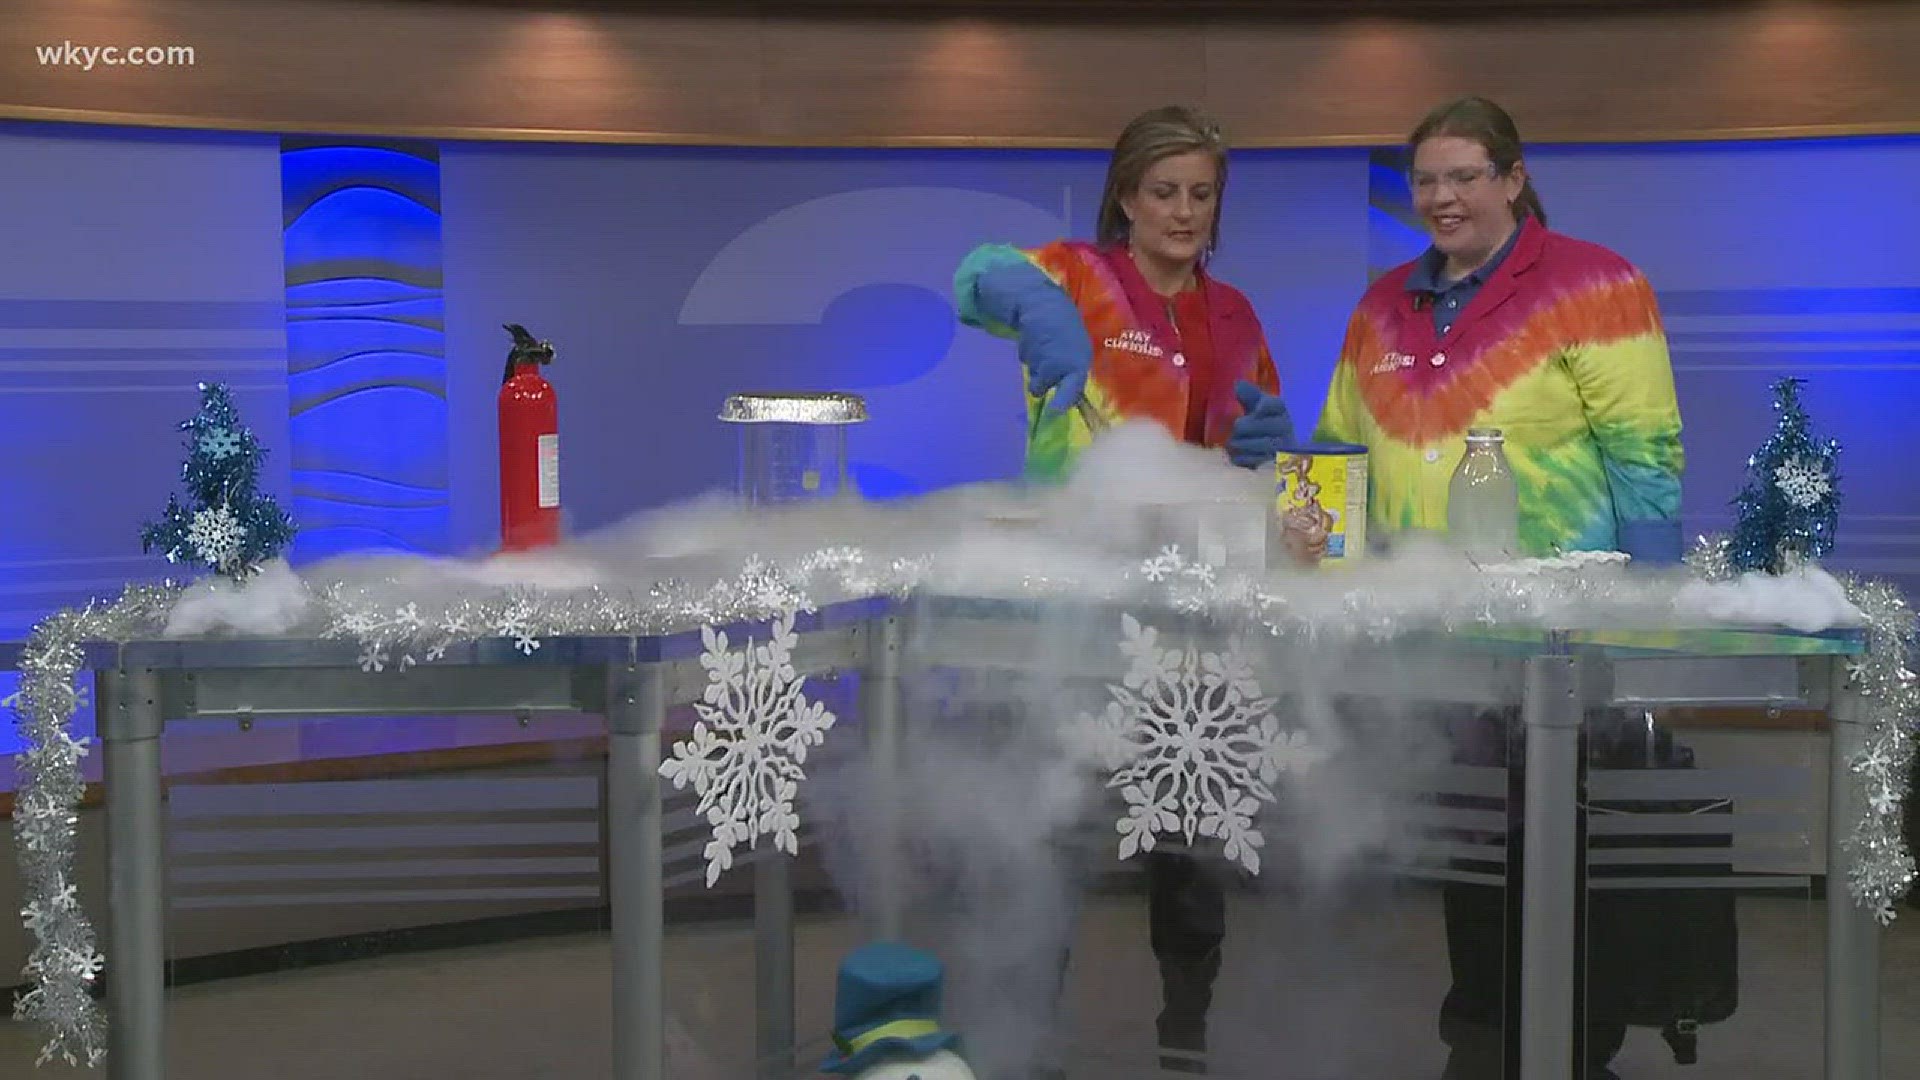 Winter science fun comes to Great Lakes Science Center